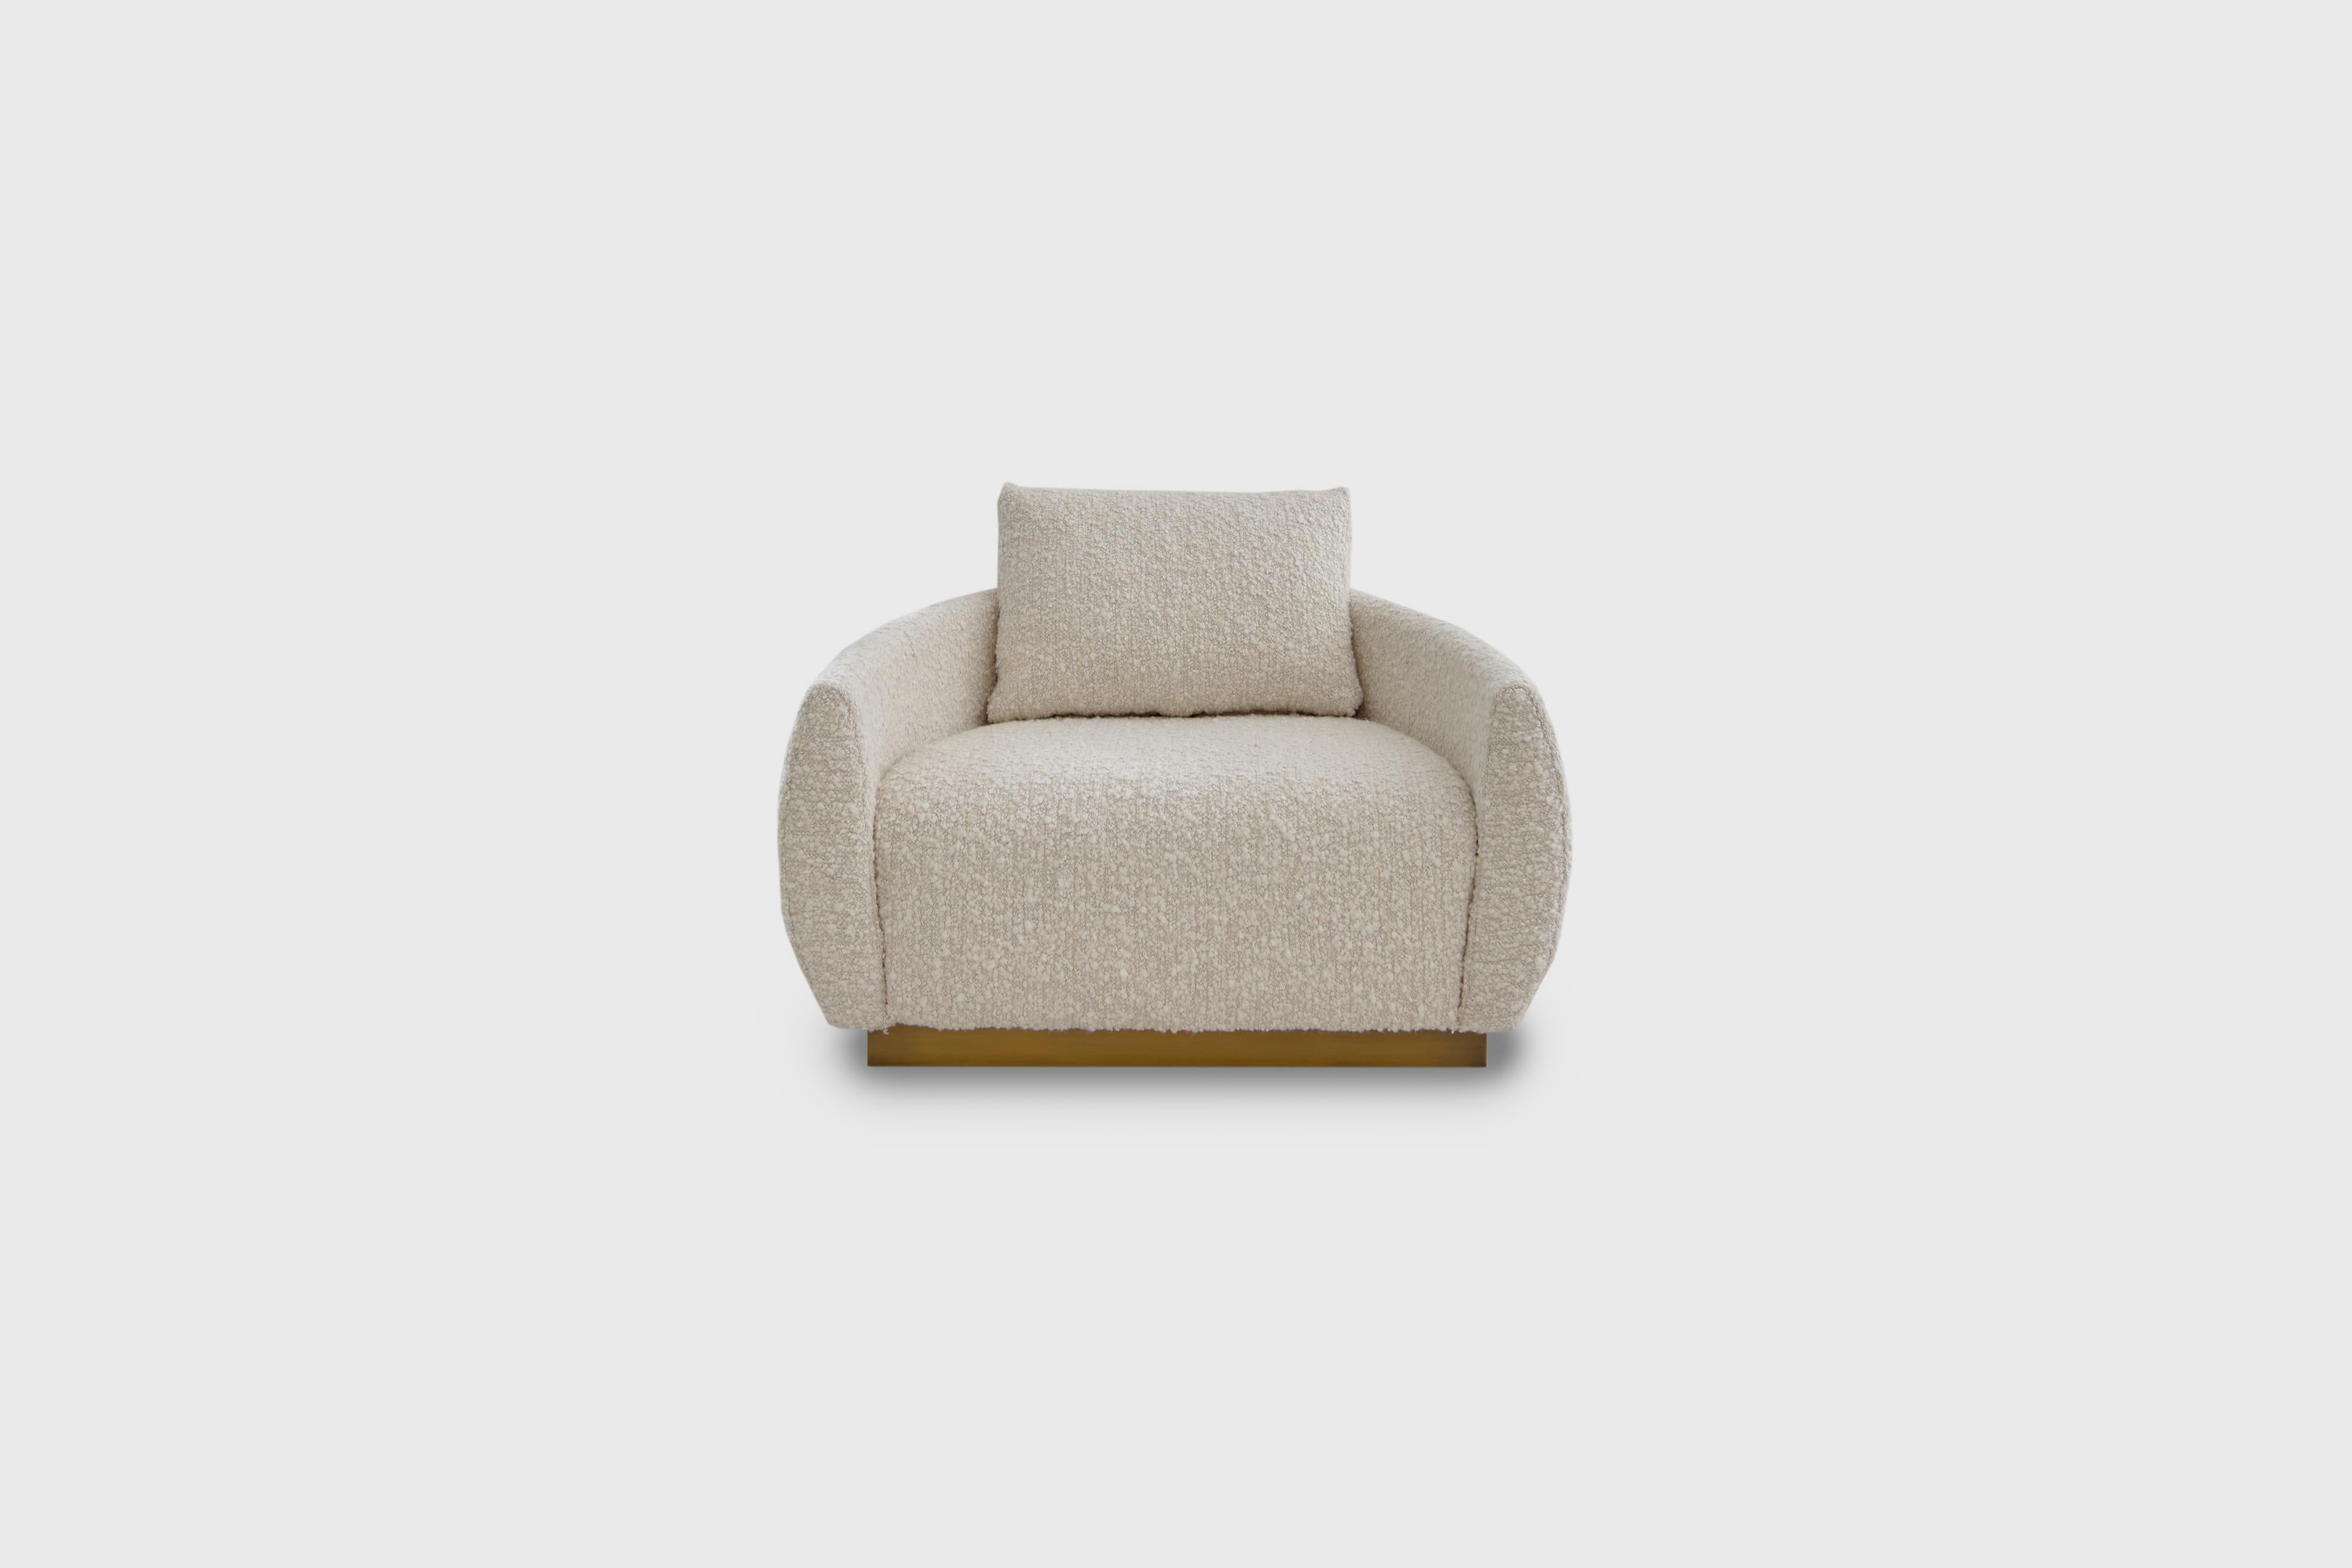 Egge lounge chair by Atra Design
Dimensions: D 83.9 x W 105.6 x H 62.9 cm
Materials: Elitis Horizon boulé fabric, brass.

Atra Design
We are Atra, a furniture brand produced by Atra form a mexico city–based high end production facility that also